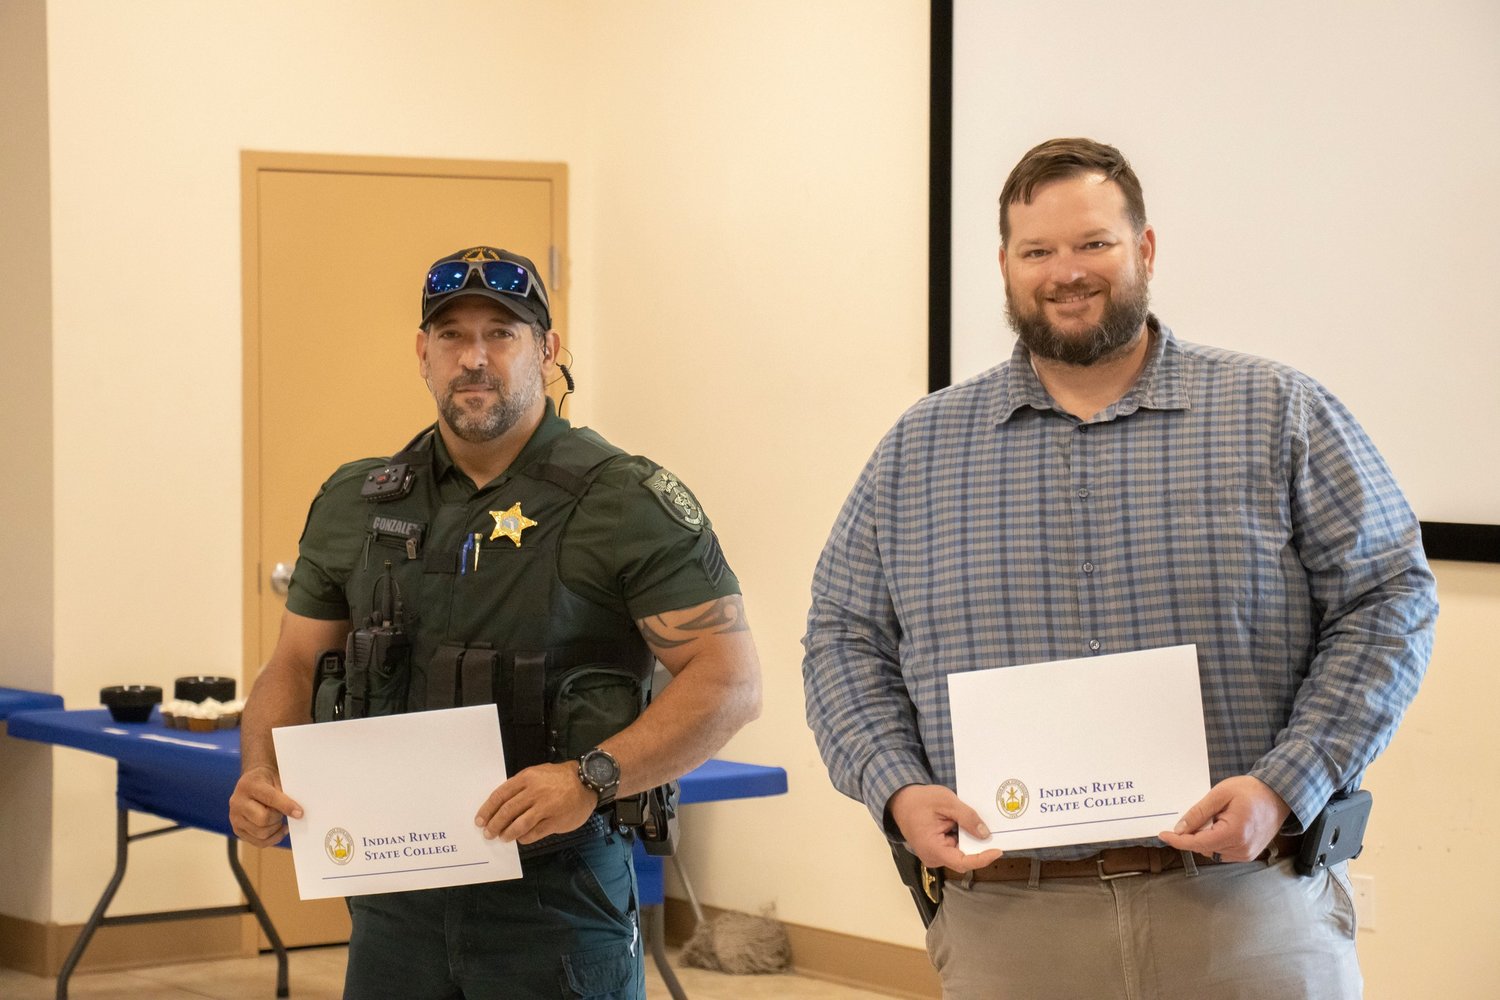 Sgt. Javier Gonzalez and Detective Ryane Ammons completed leadership academy this week.
Not pictured but also receiving the award were Sgt. Max Waldron and Cpl. Joseph Hall.